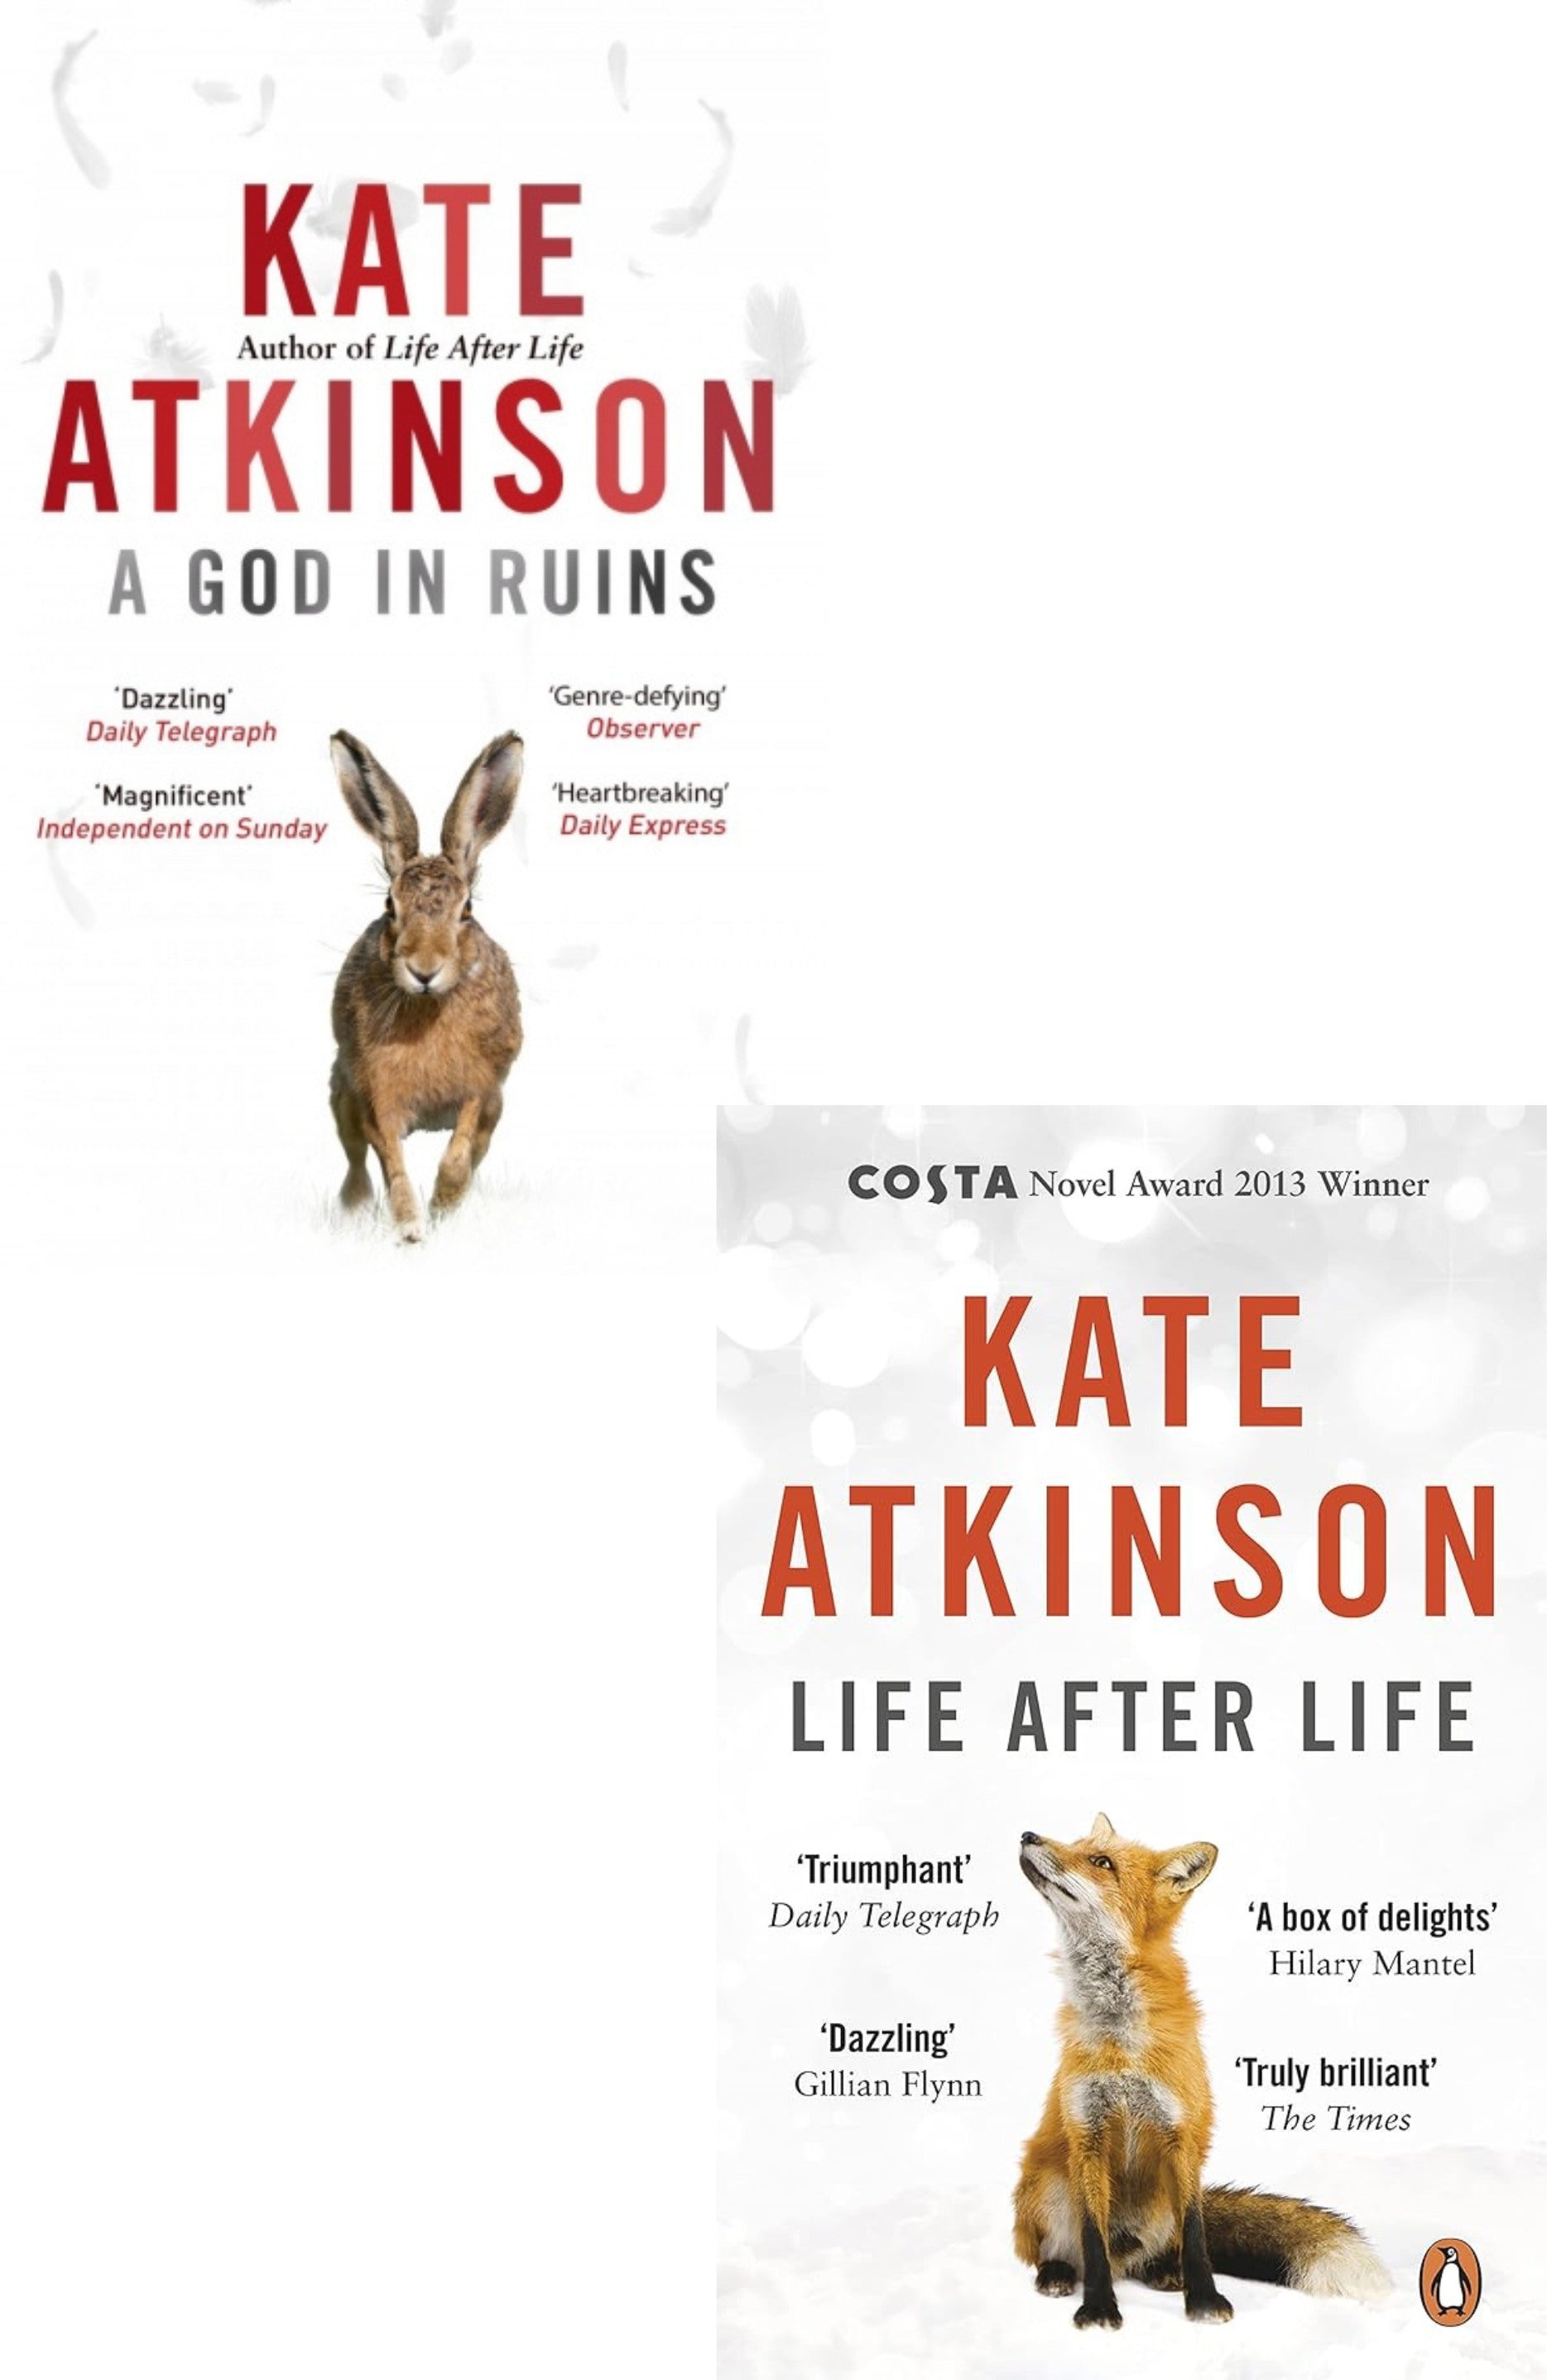 Kate Atkinson Bestseller Book Combo ( Life After Life, A God in Ruins )